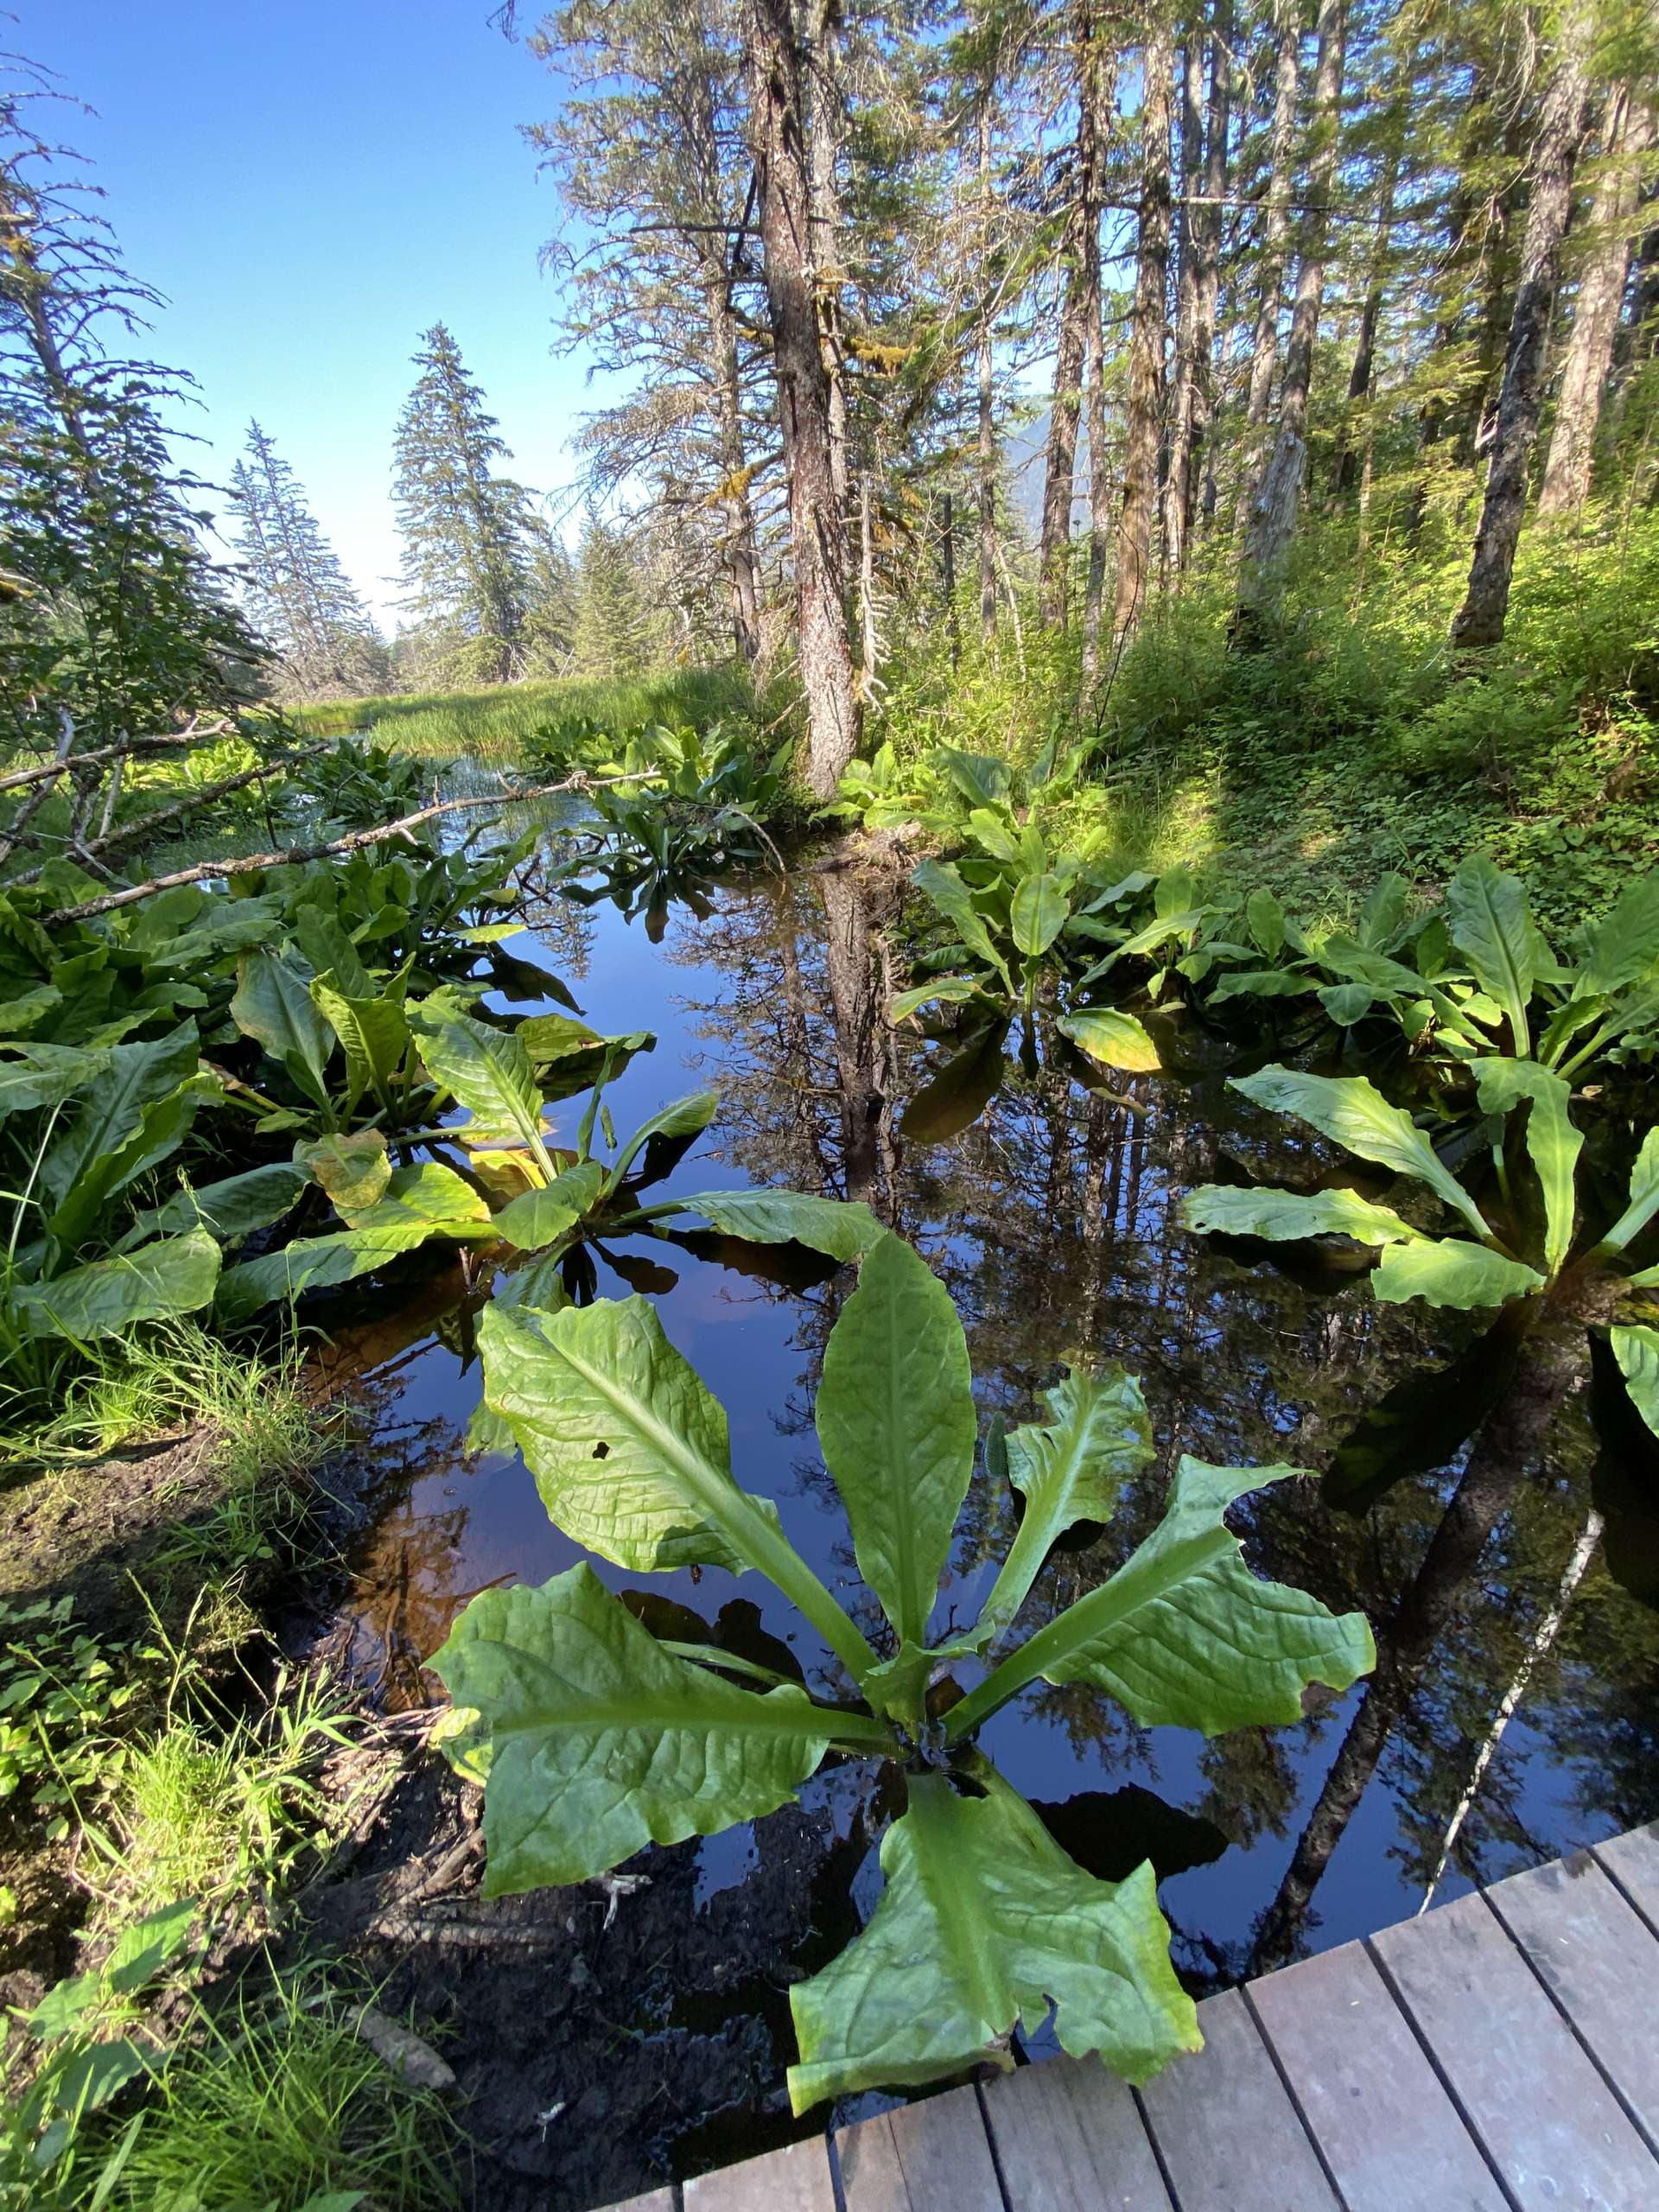 Skunk cabbage growing in the water next to a boardwalk.